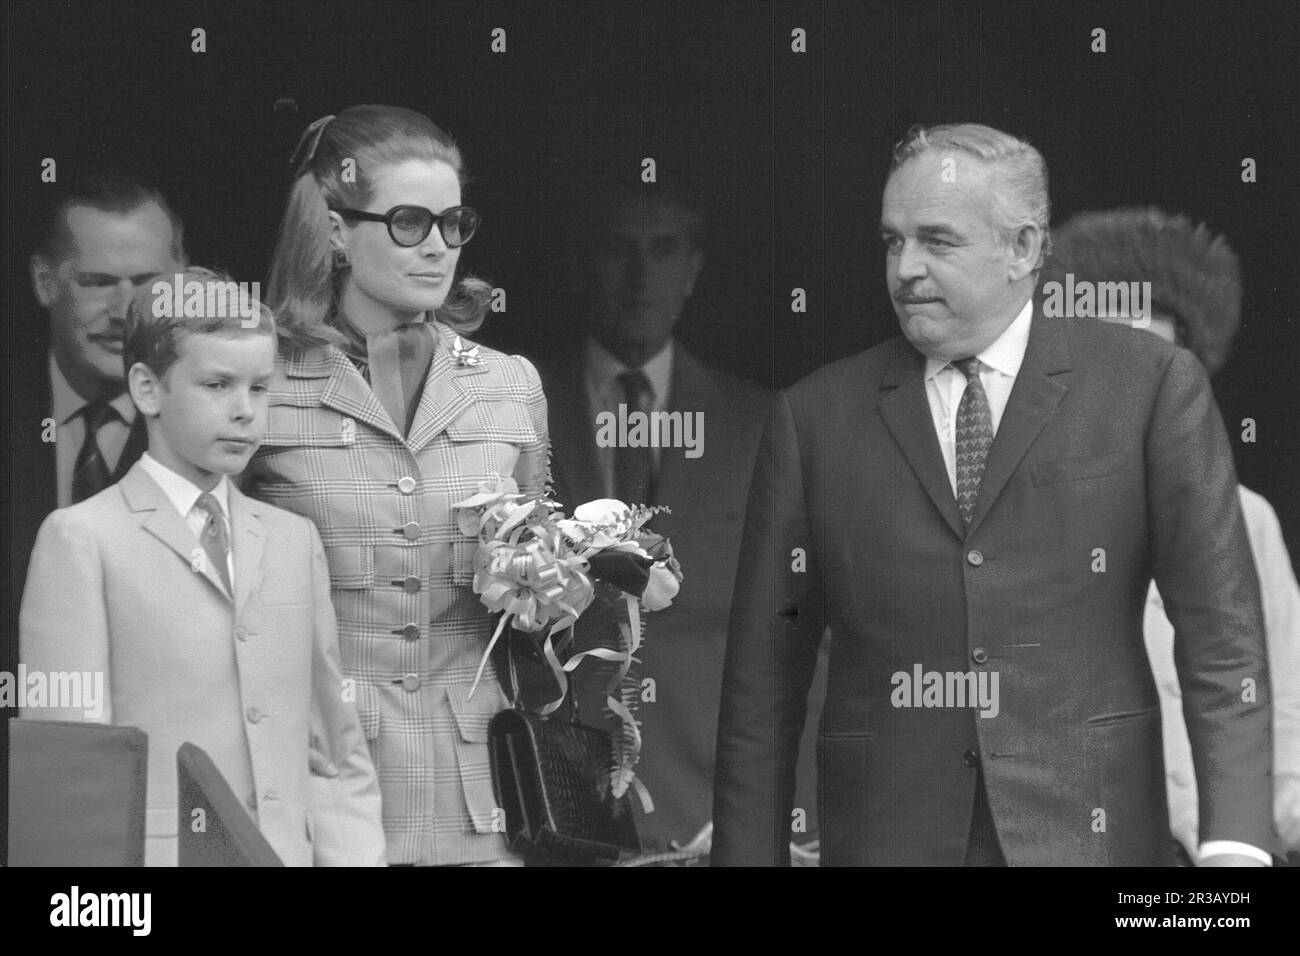 ARCHIVE PHOTO: Fuerst Rainier of Monaco would have been 100 years old on May 31, 2023, Fuerst RAINIER of MONACO, with his wife Gracia Patricia Grace Kelly, son Albert on the left, as a spectator at the Formula 1 Grand Prix of Monte Carlo Monaco, May 18, 1969, SW -Recording, ? Stock Photo